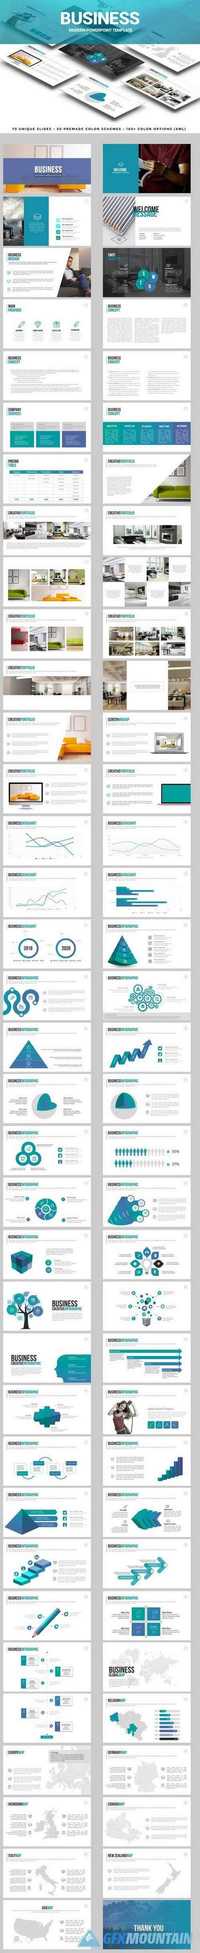 Business Powerpoint 729460